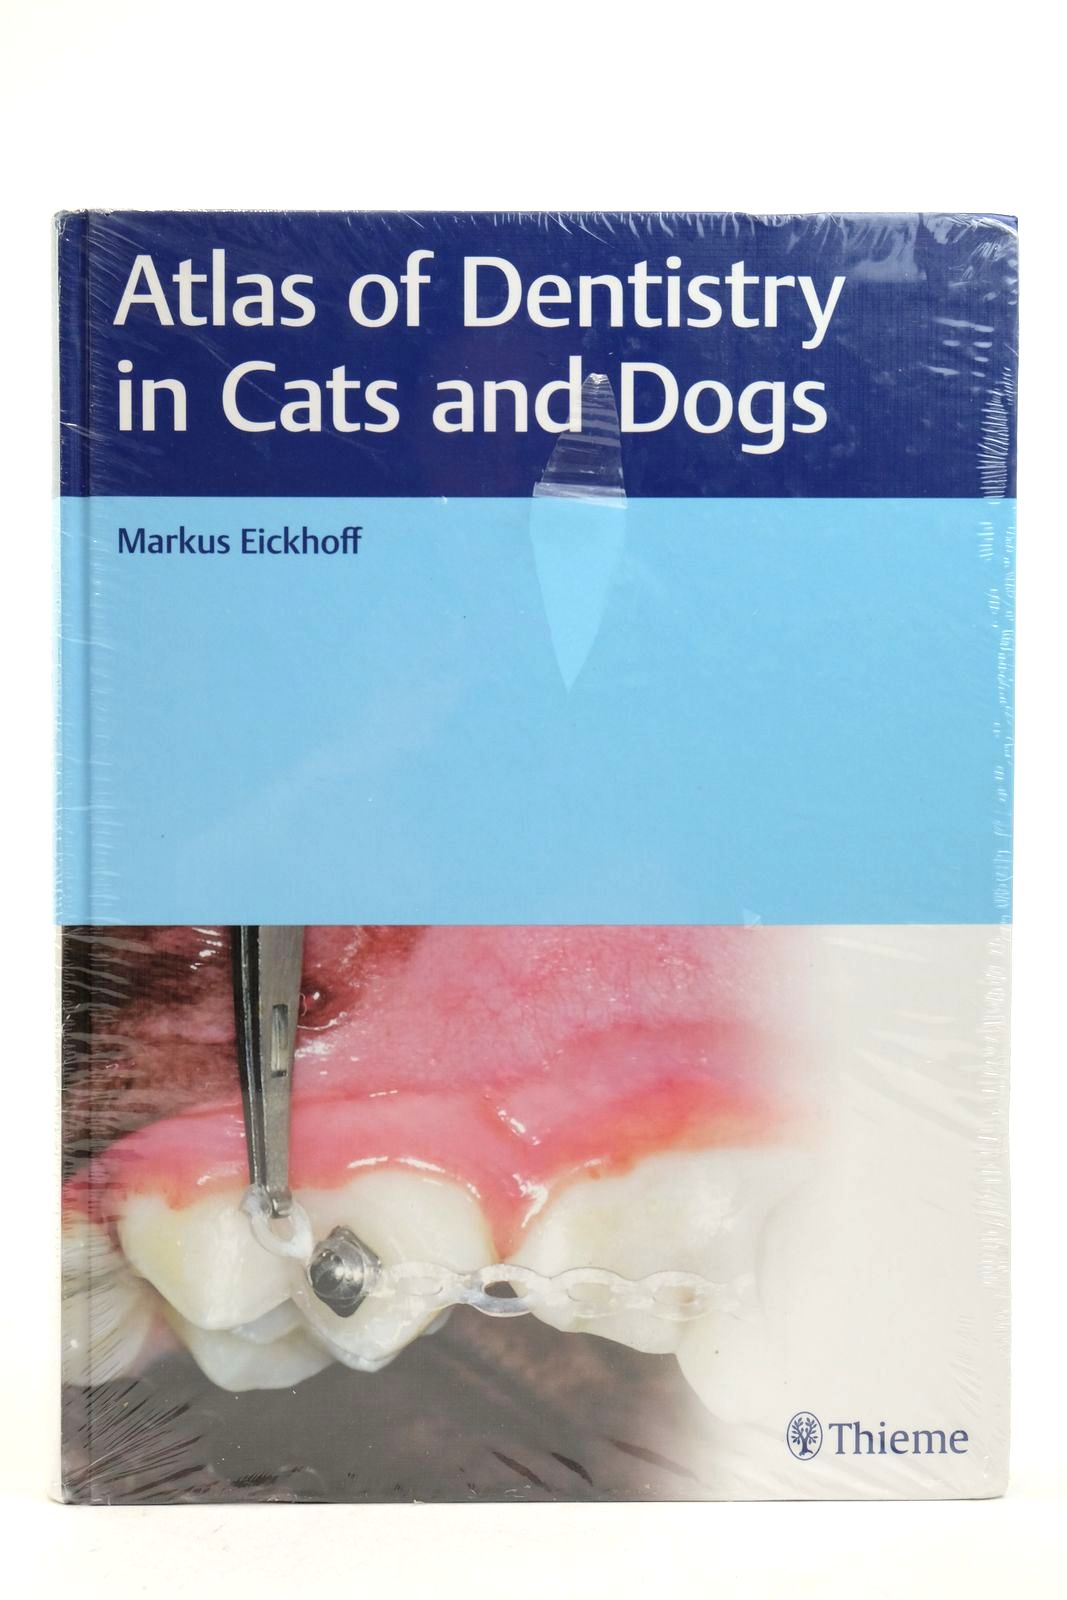 Photo of ATLAS OF DENTISTRY IN CATS AND DOGS written by Eickhoff, Markus published by Thieme (STOCK CODE: 2140433)  for sale by Stella & Rose's Books